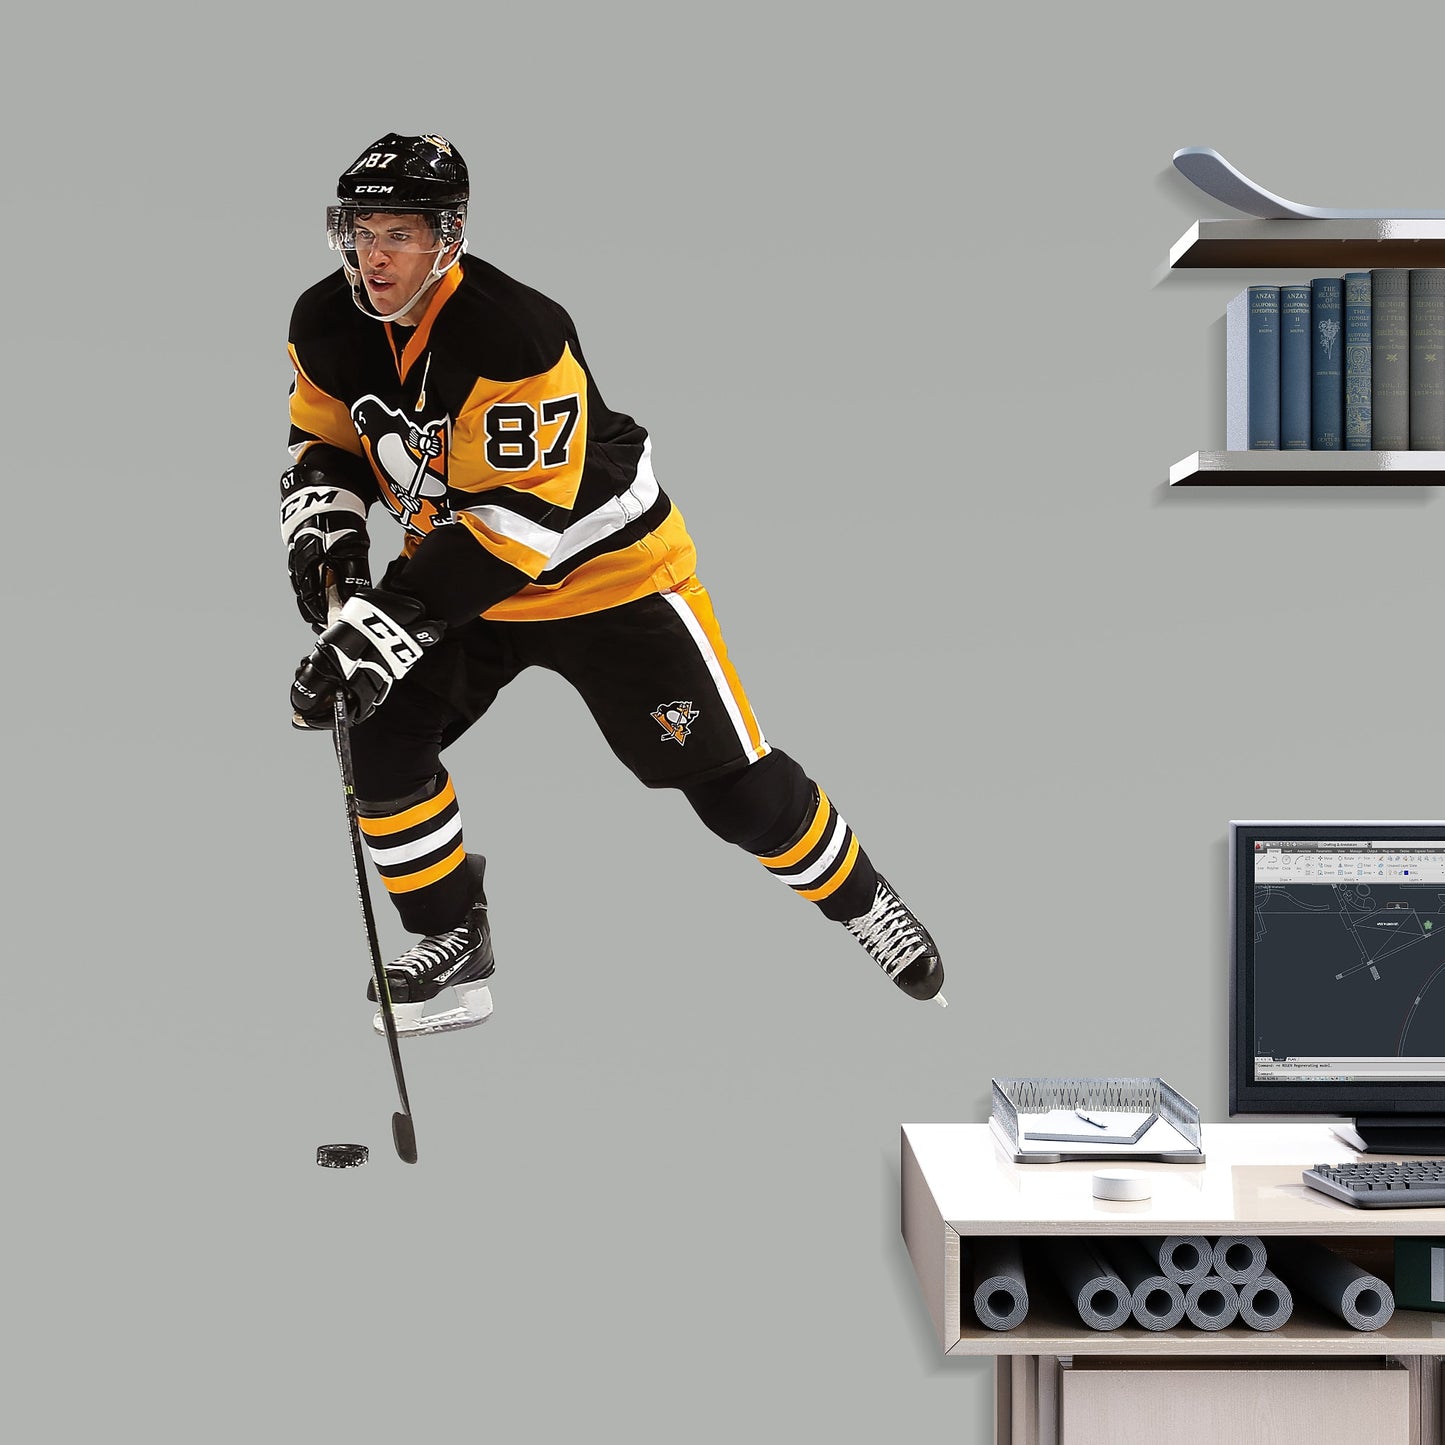 Sidney Crosby - Officially Licensed NHL Removable Wall Decal